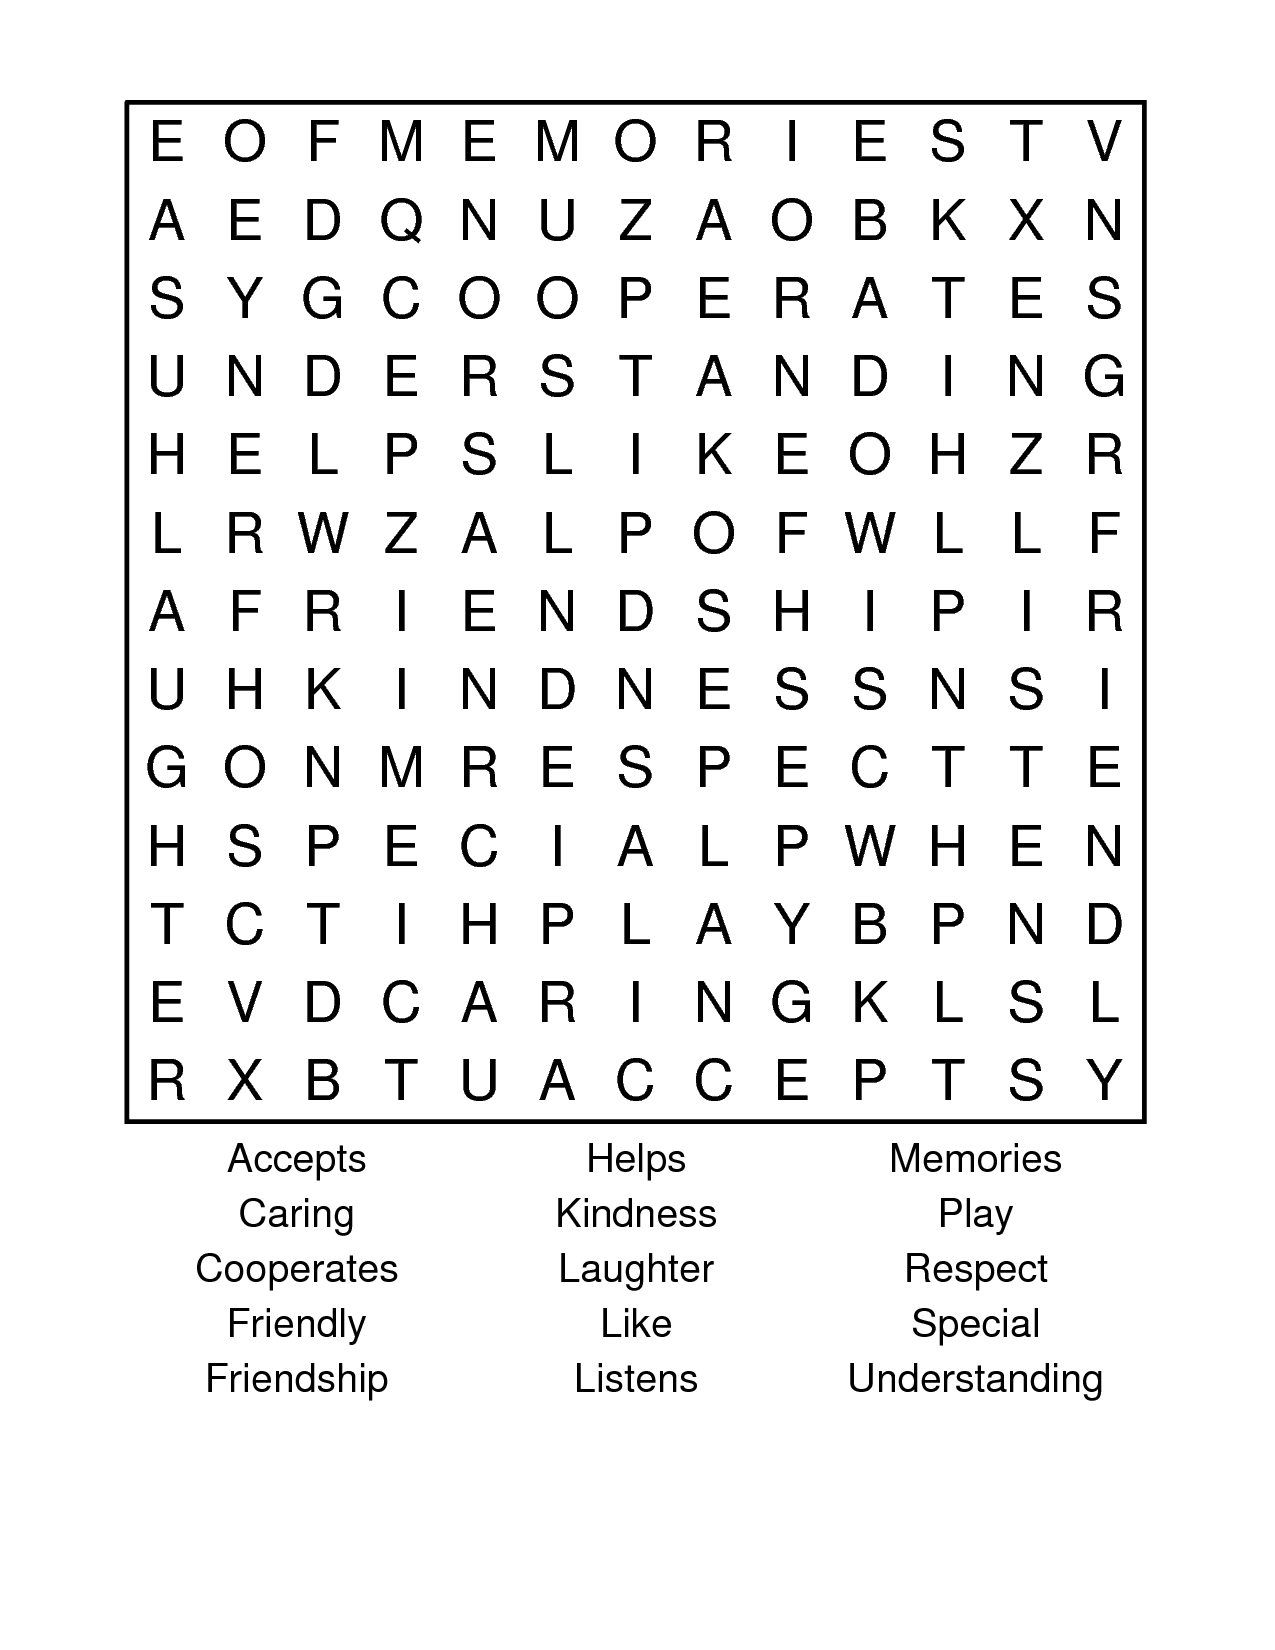 Friendship Word Search Puzzle Image